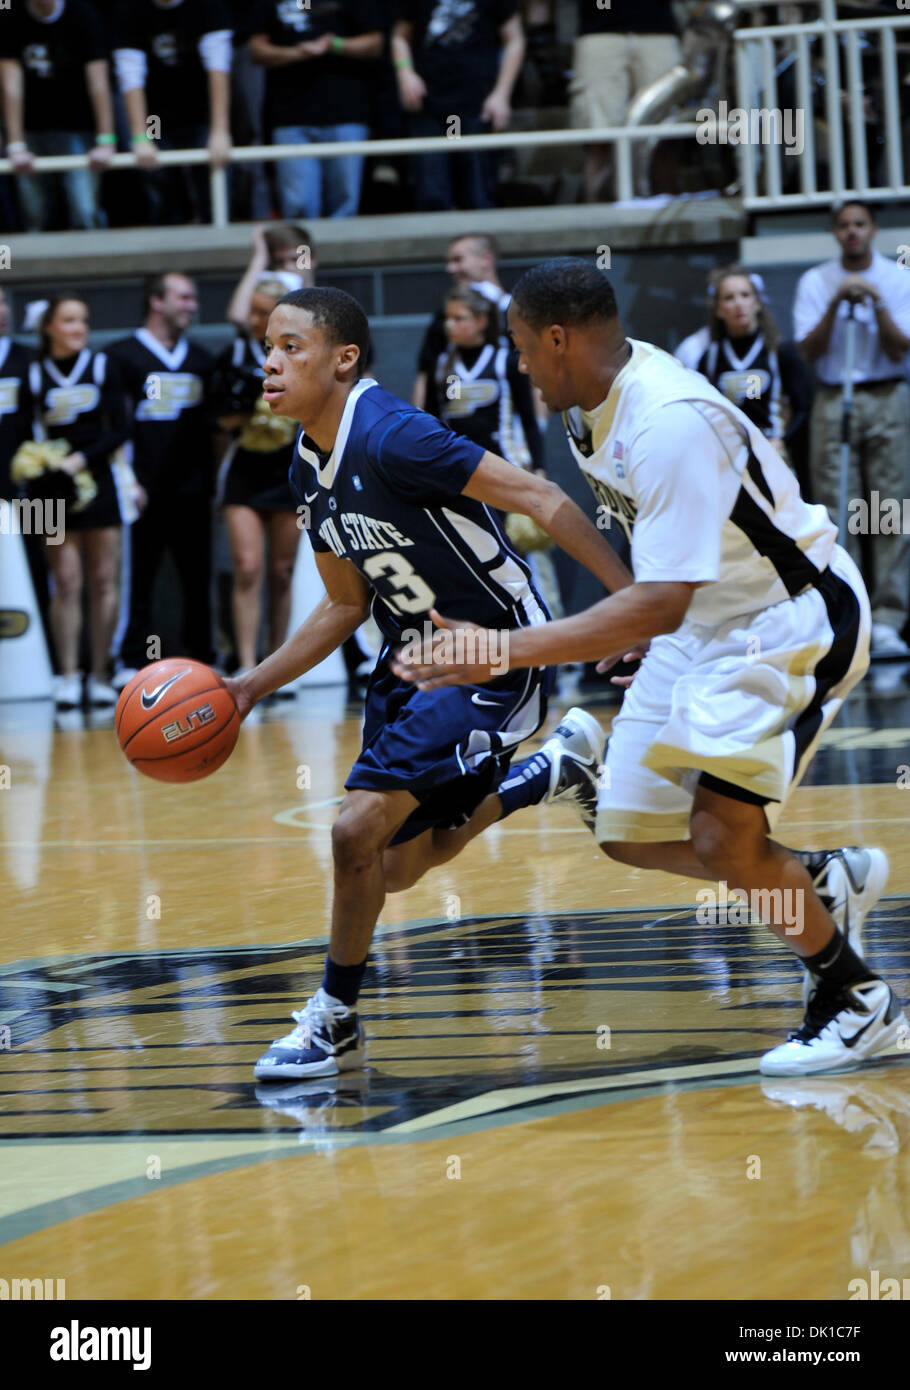 Jan. 20, 2011 - West Lafayette, Indiana, United States of America - Penn State's So G Tim Frazier (23) drives past Purdue's  Jr G John Hart (32) in the game between Penn State and Purdue at Mackey Arena in West Lafayette. Purdue won the game 63-62. (Credit Image: © Sandra Dukes/Southcreek Global/ZUMAPRESS.com) Stock Photo